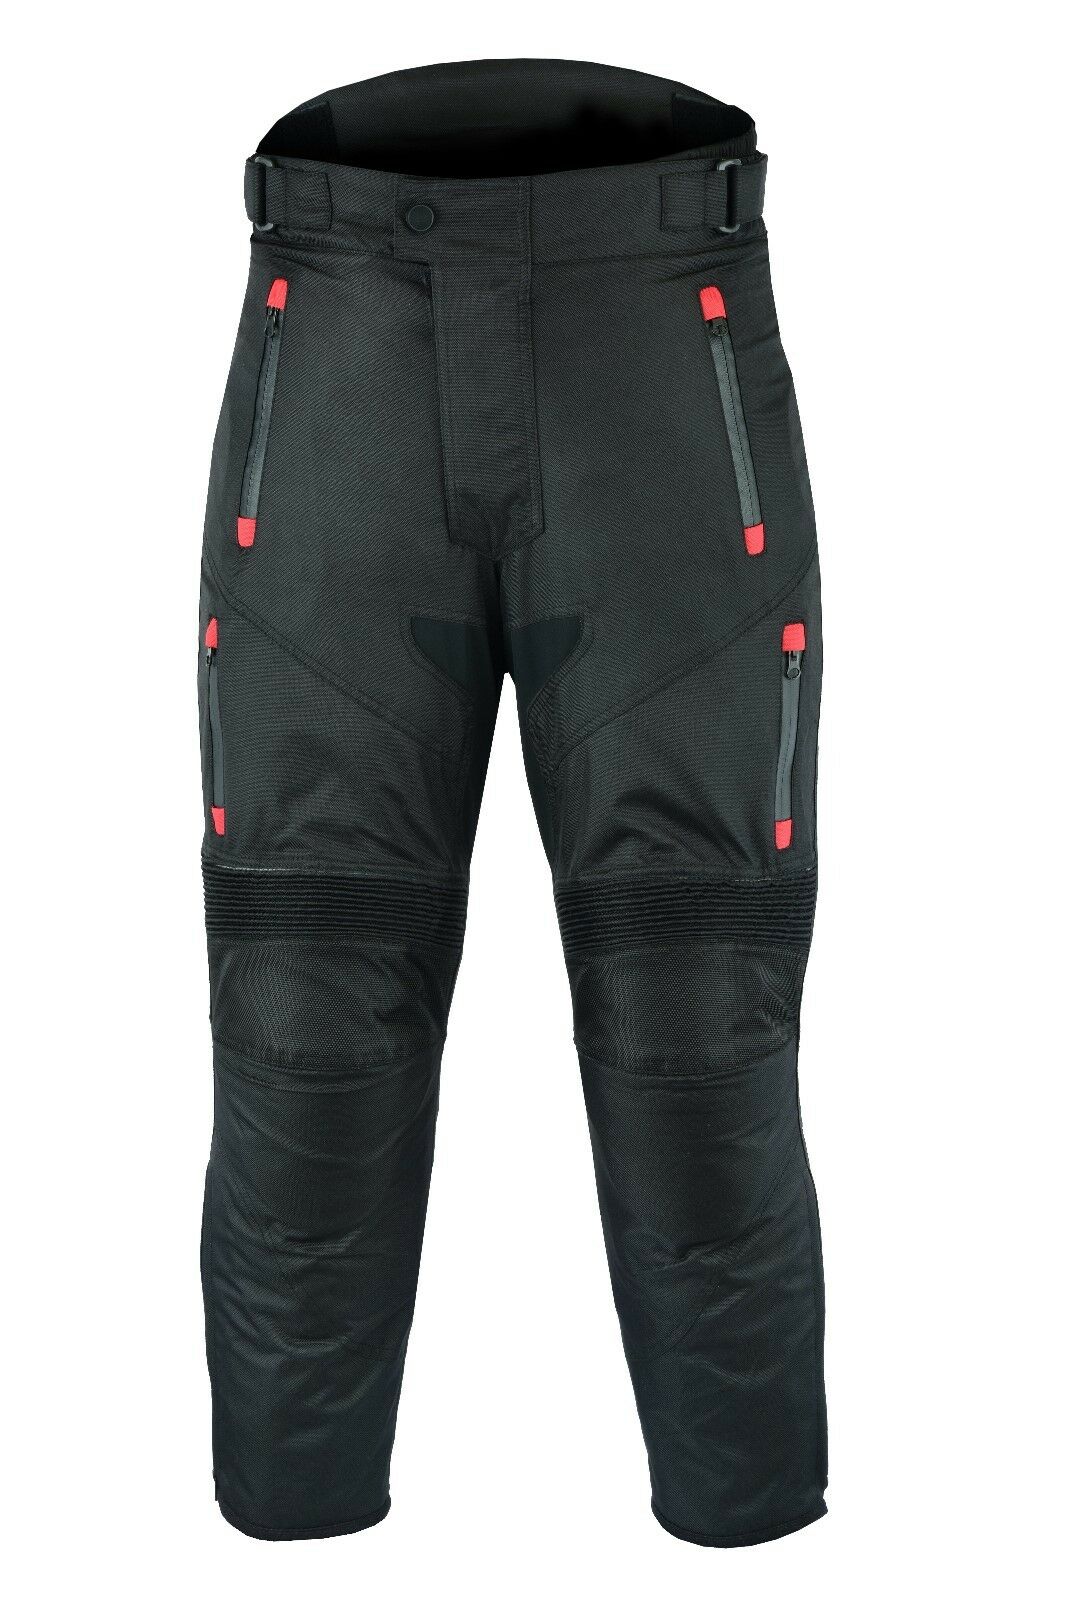 Black Cargo Motorcycle Trousers - Dragon Rider